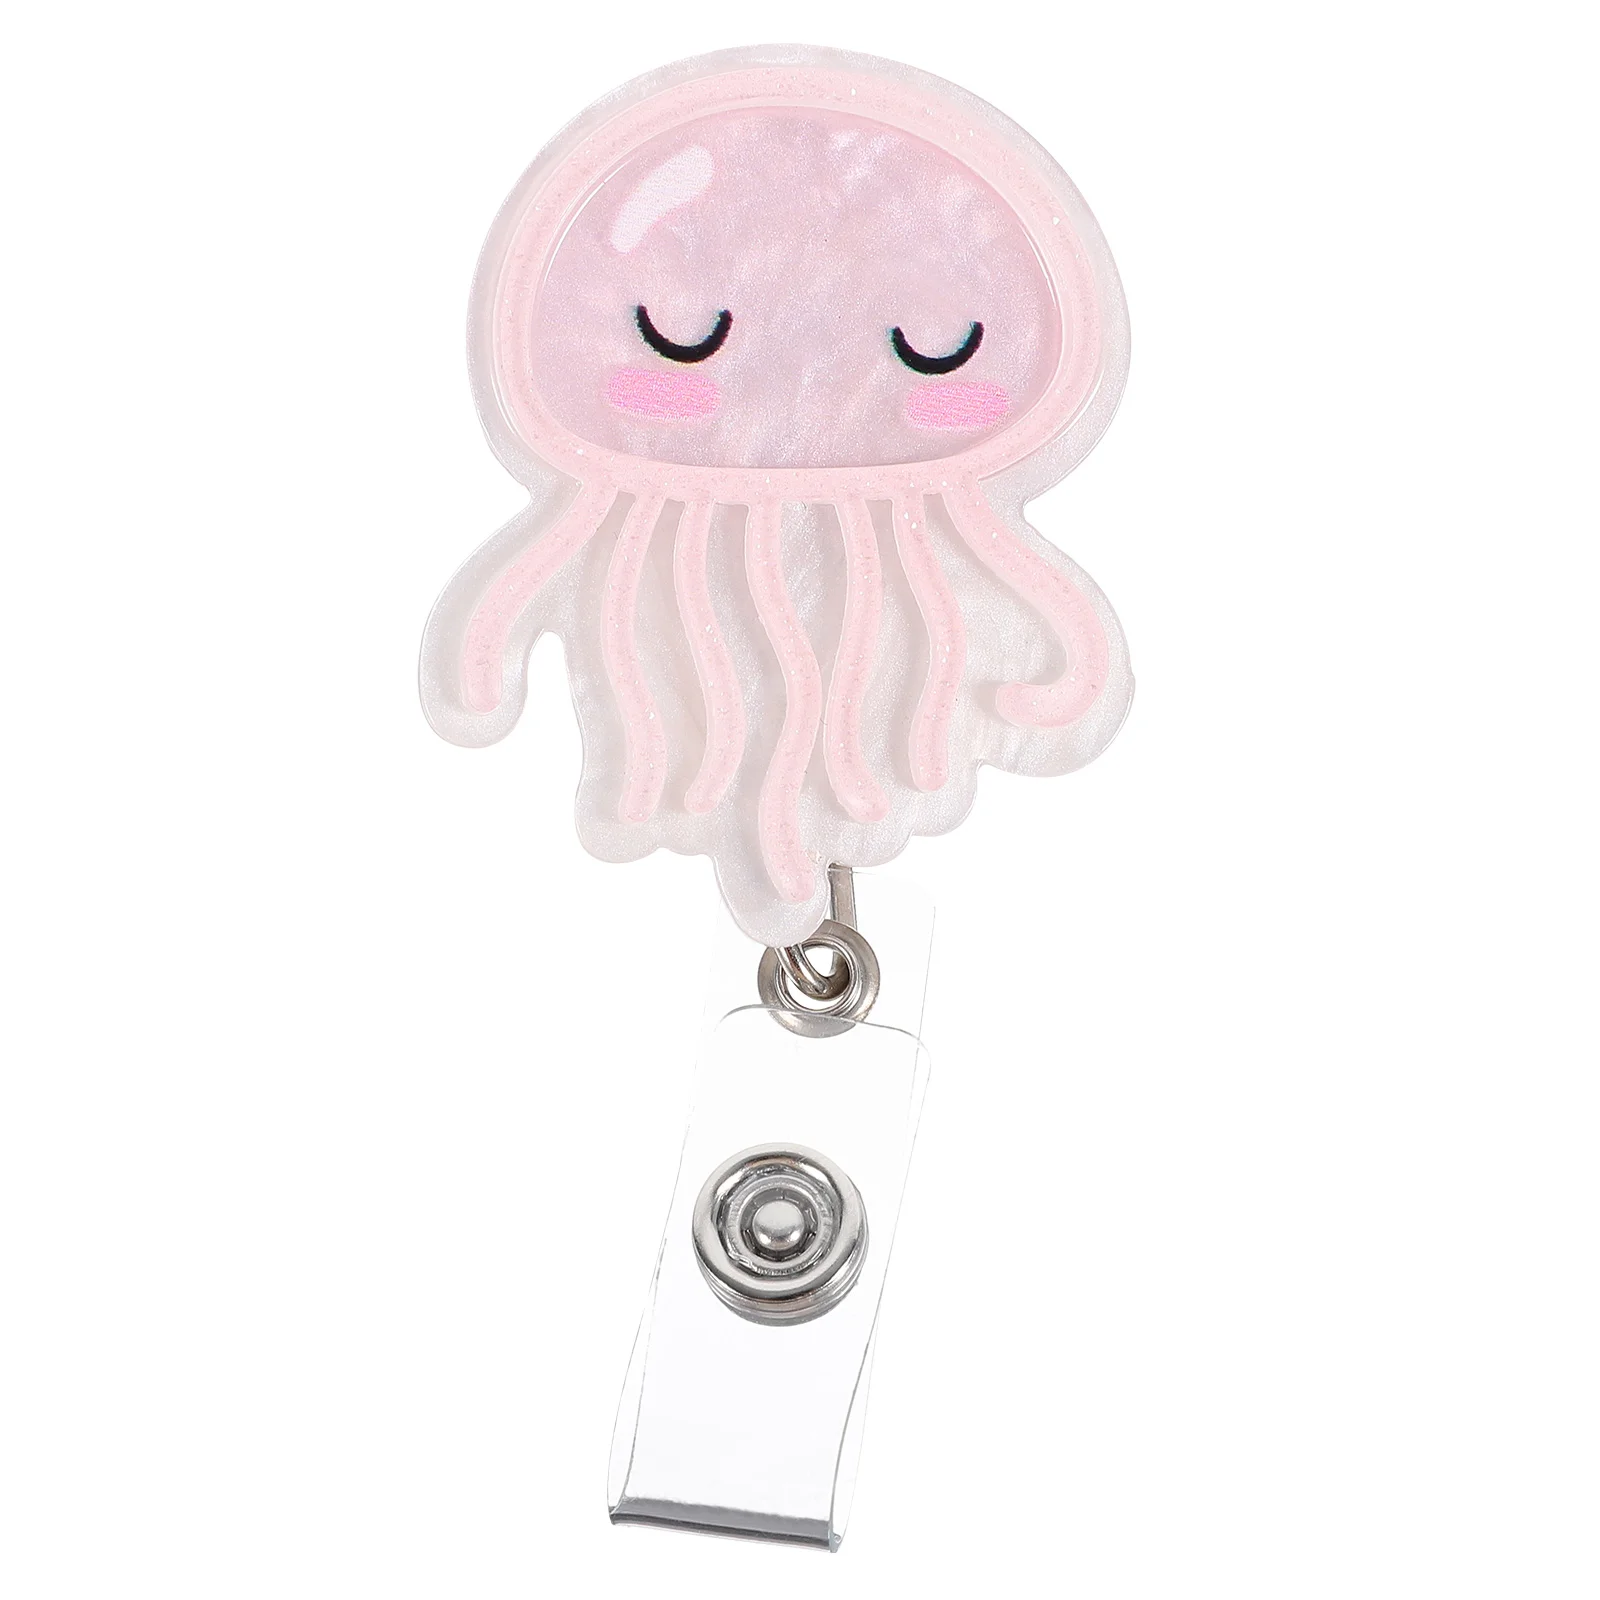 

Jellyfish ID Holder Convenient Badge Multi-function Cute Nurse Holders Clips for Nurses Reel Telescopic Name Tag